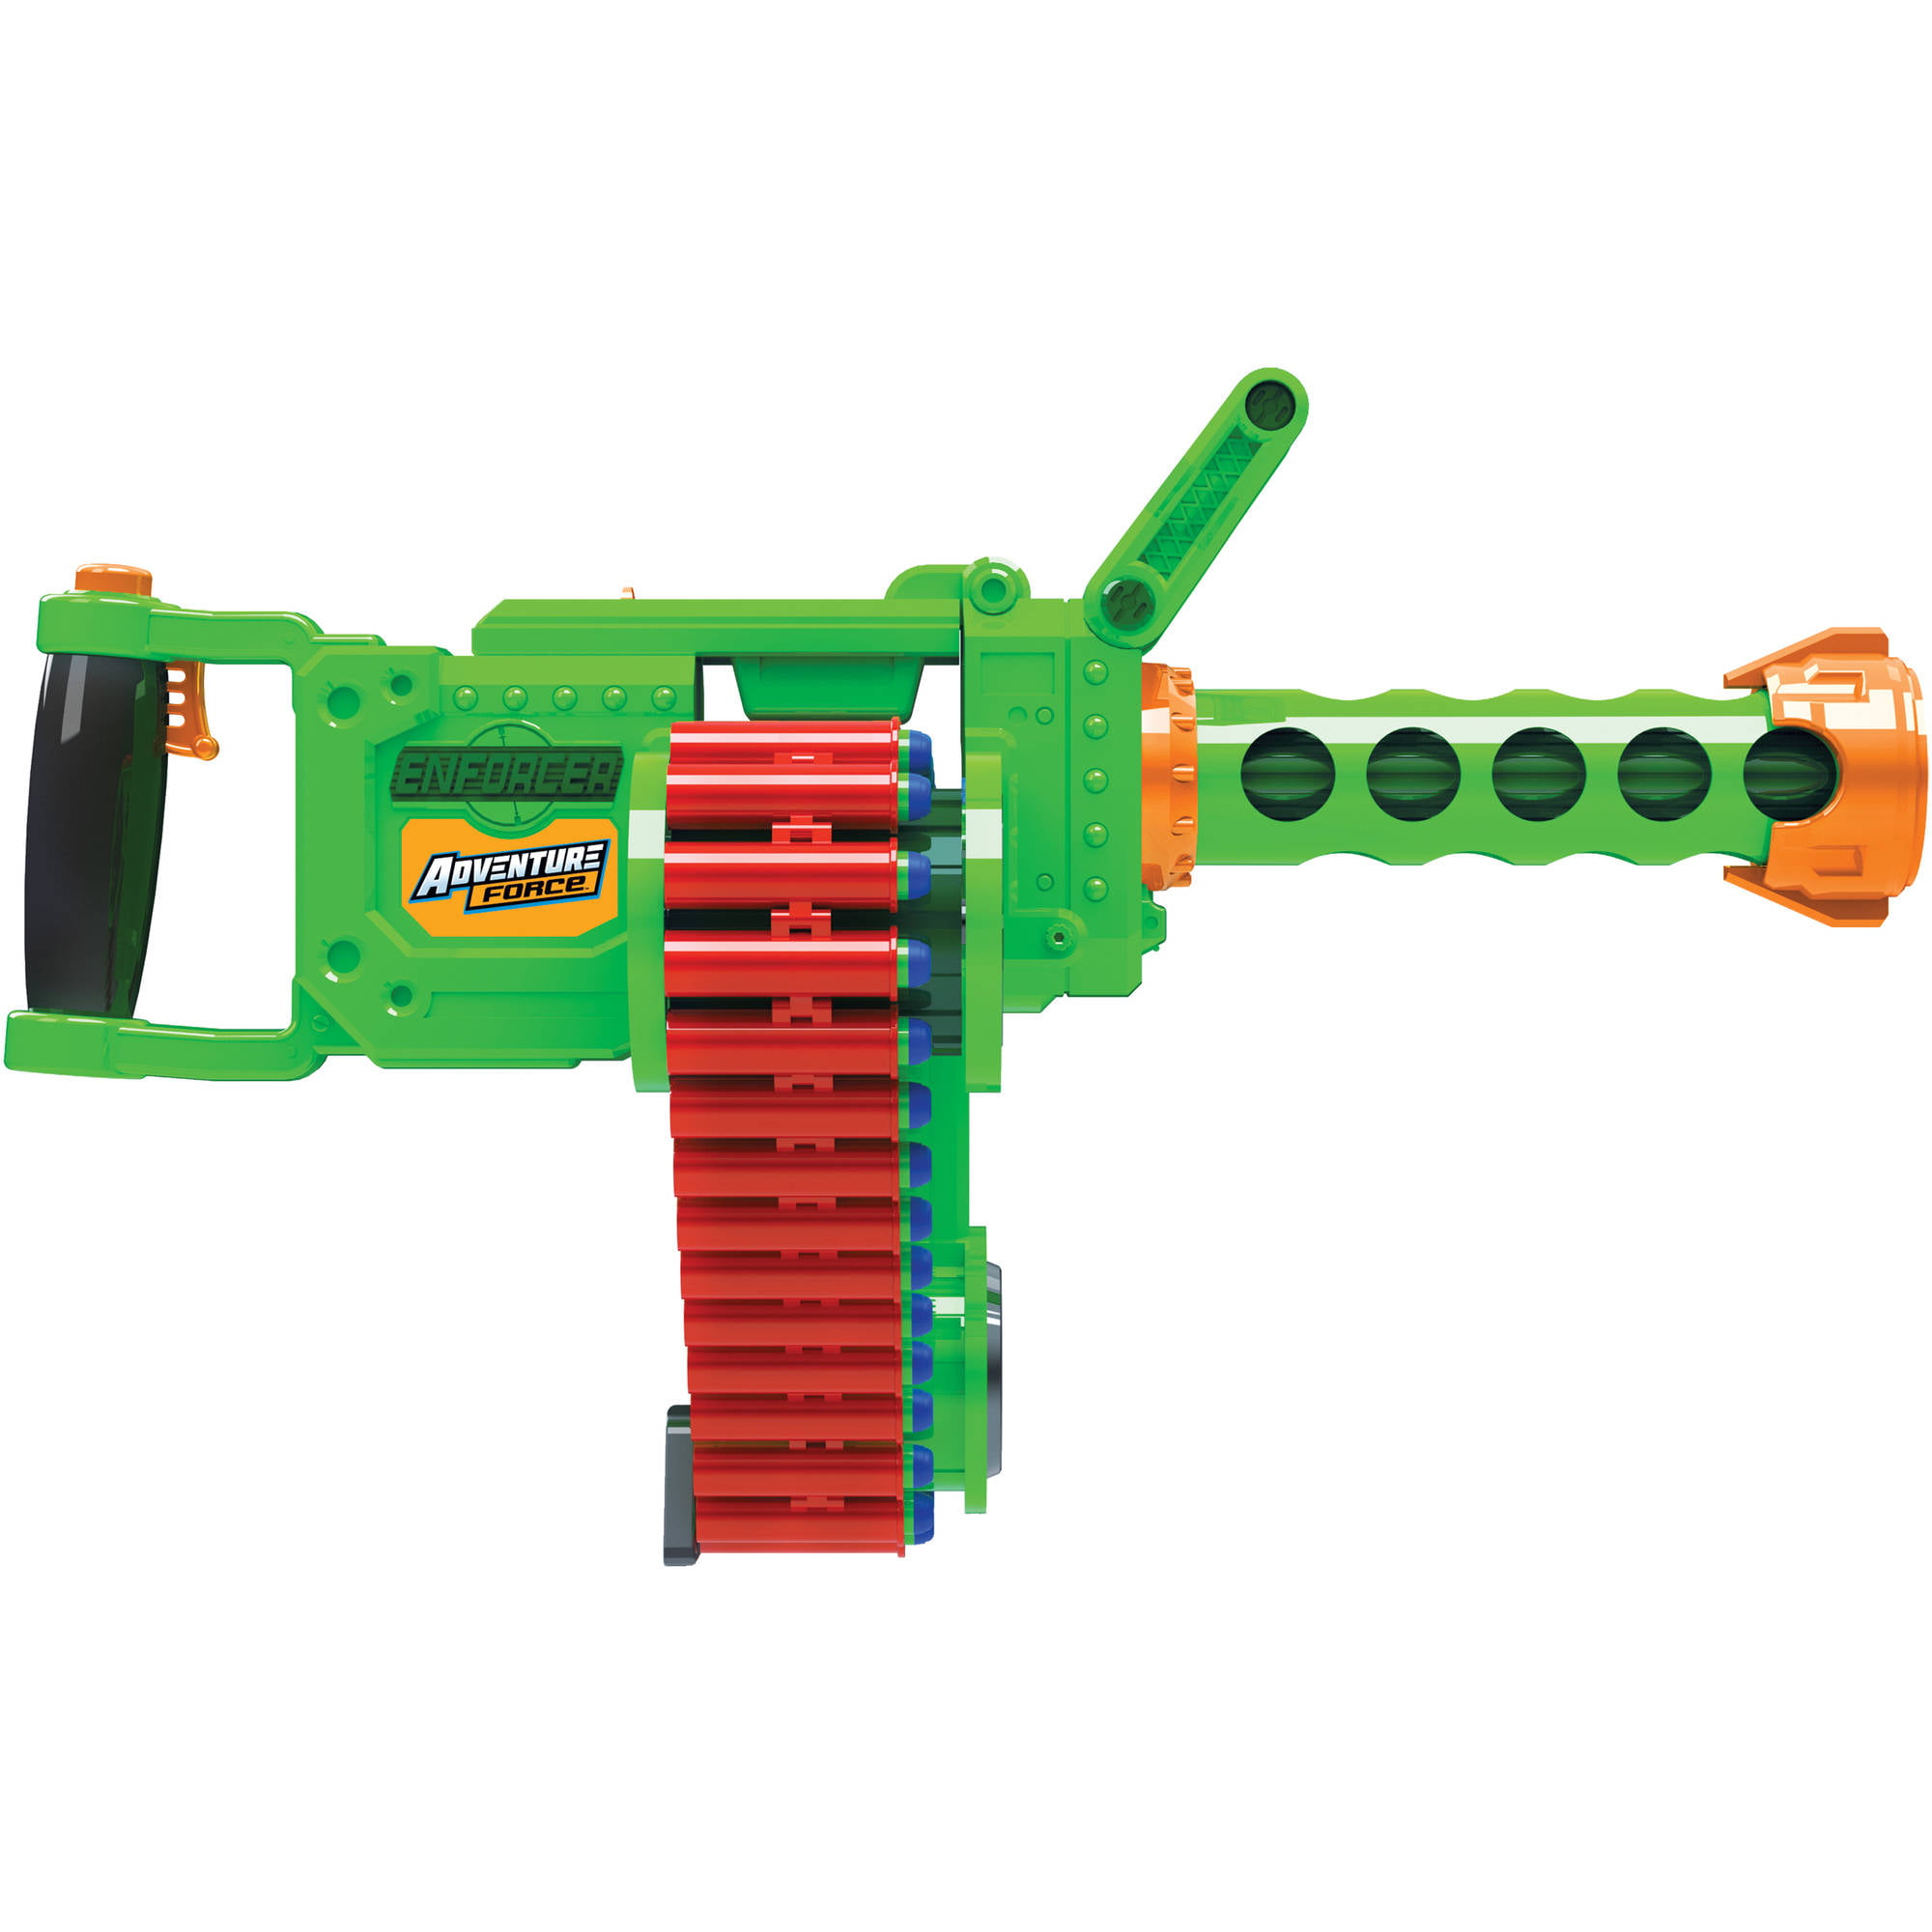 Nerf Gun Toy Organizer : Pin on Boy rooms : Check out our modded nerf.